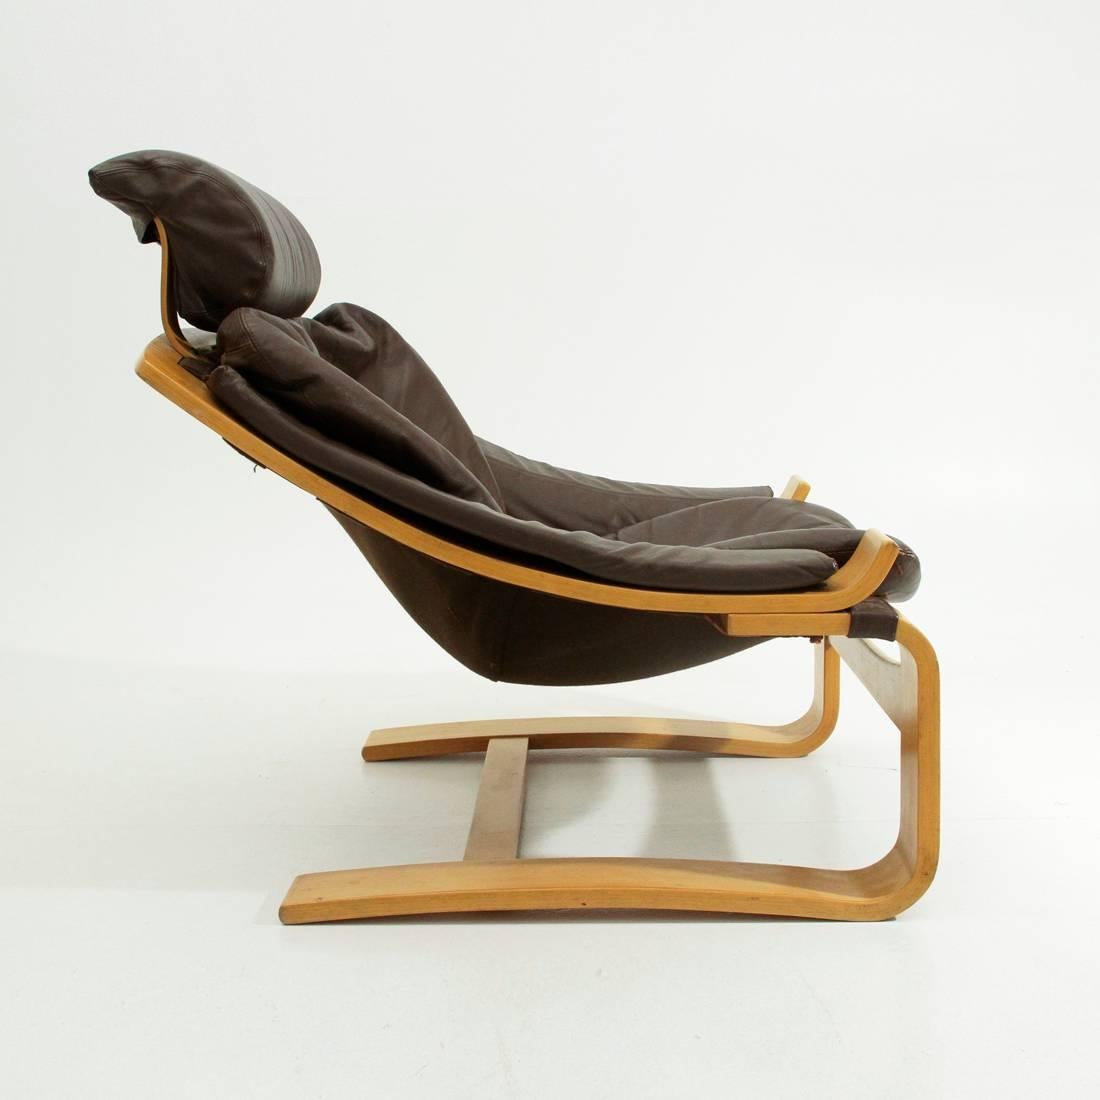 Swedish manufacturing armchair designed by Ake Fribyter for Nelo in the 1970s.
Structure in lacquered wood, seat in brown padded leather.
Adjustable headrest.
Details in leather.
Good general conditions, some signs due to normal use over